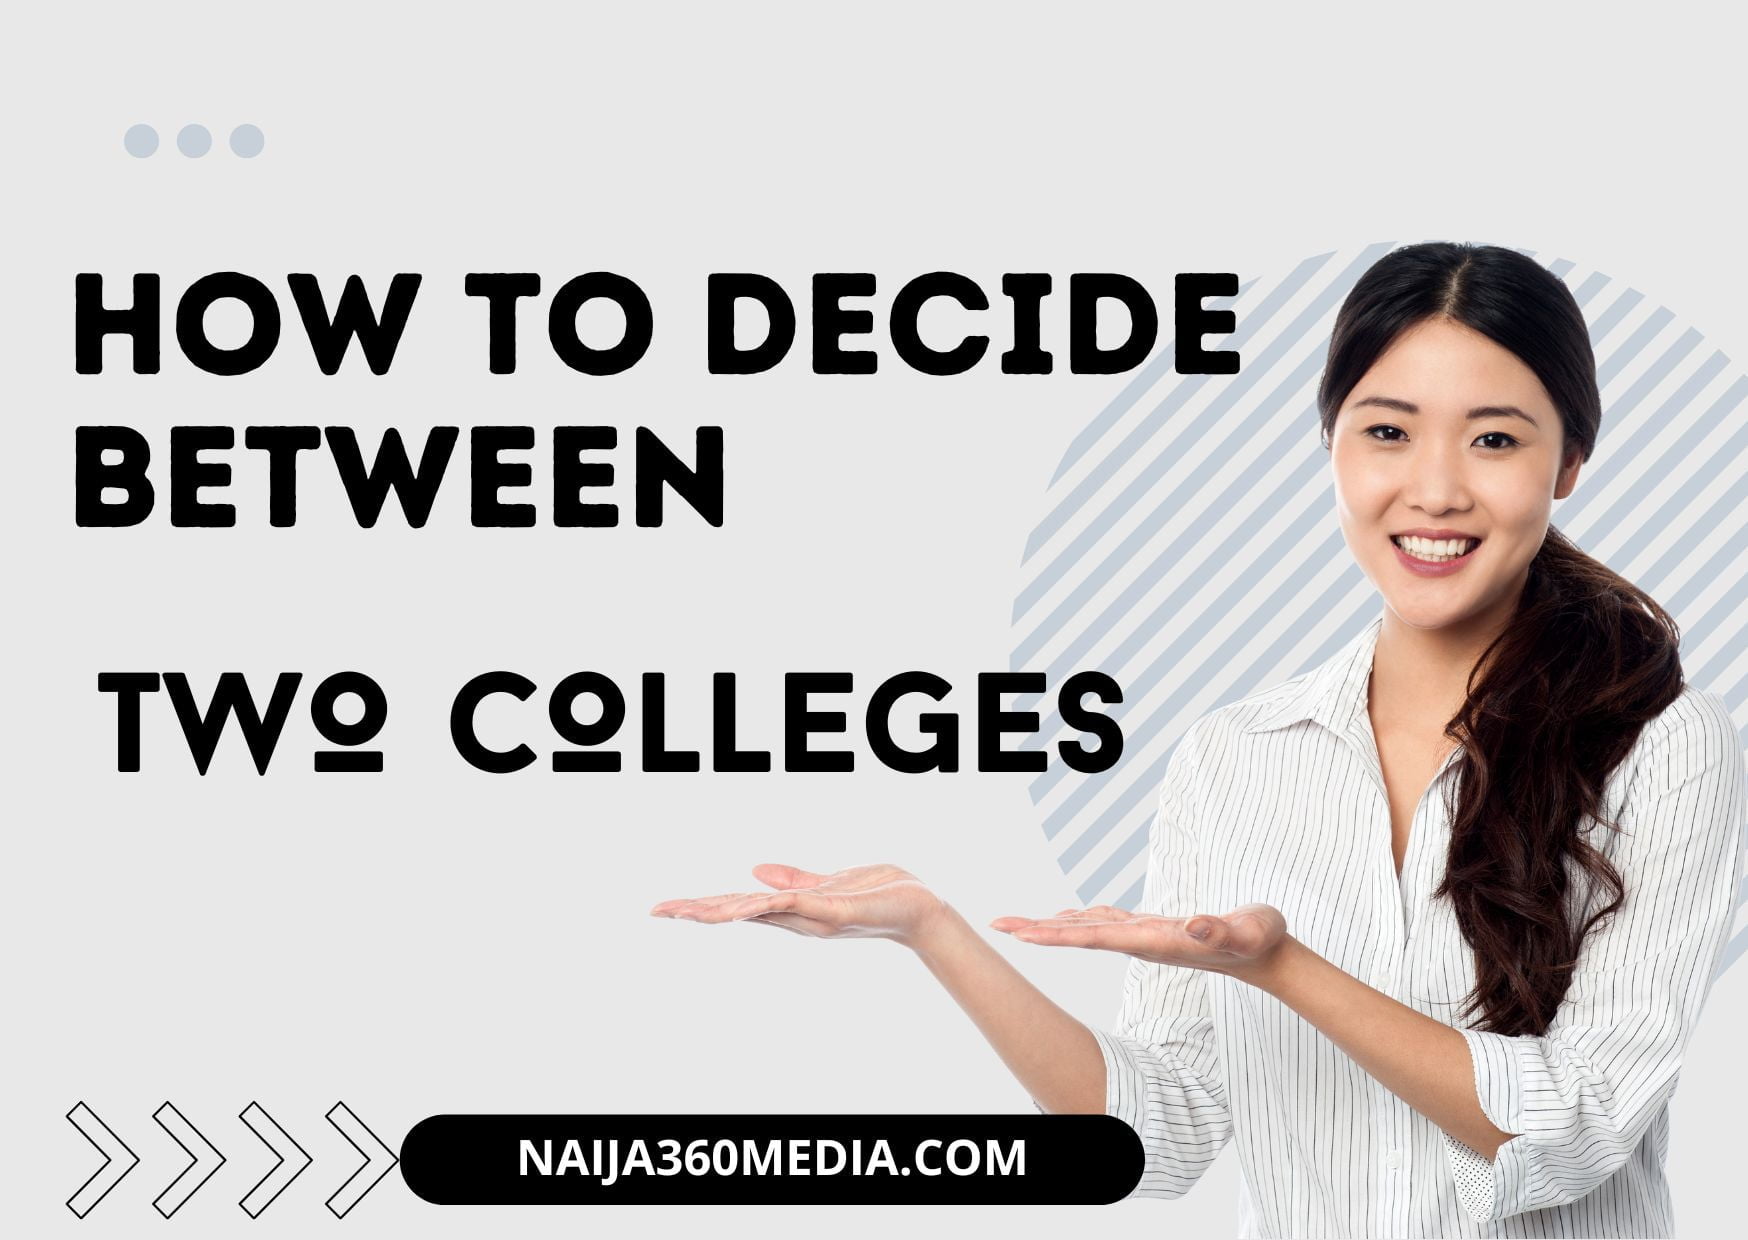 How to Decide Between Two Colleges